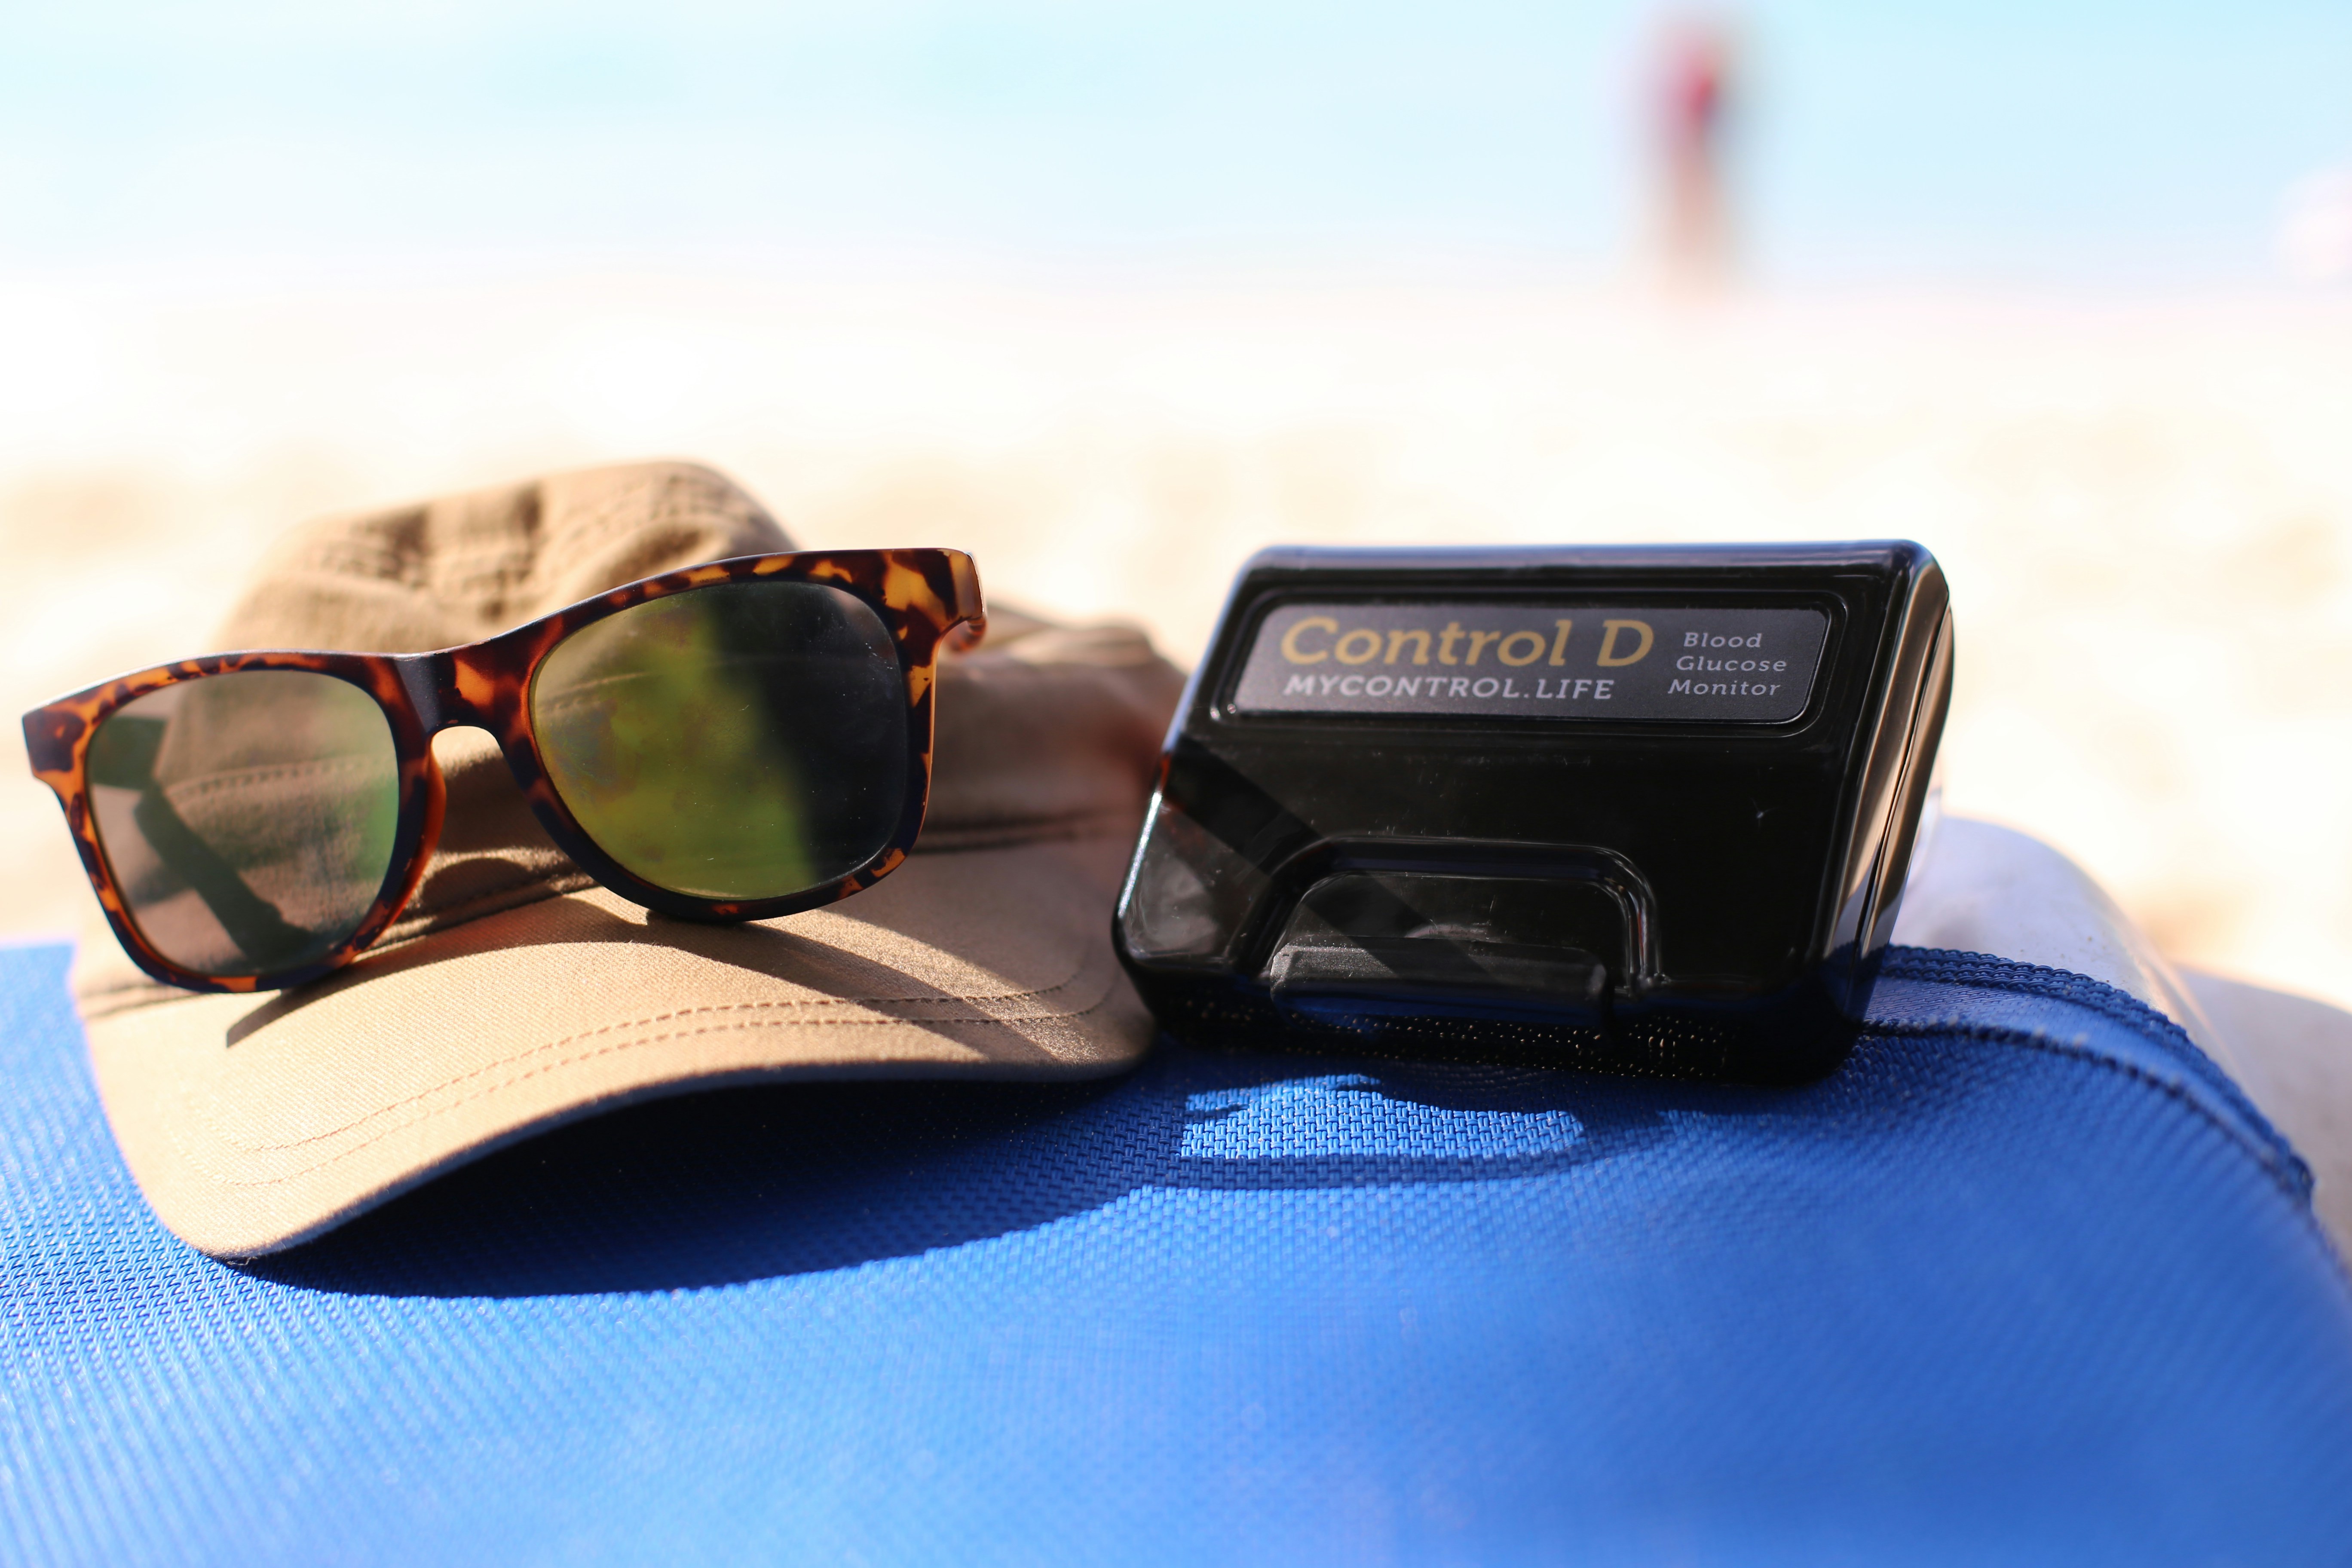 On the beach, travelling with Control D to test Blood Glucose levels when required. Handy to use device during travel.